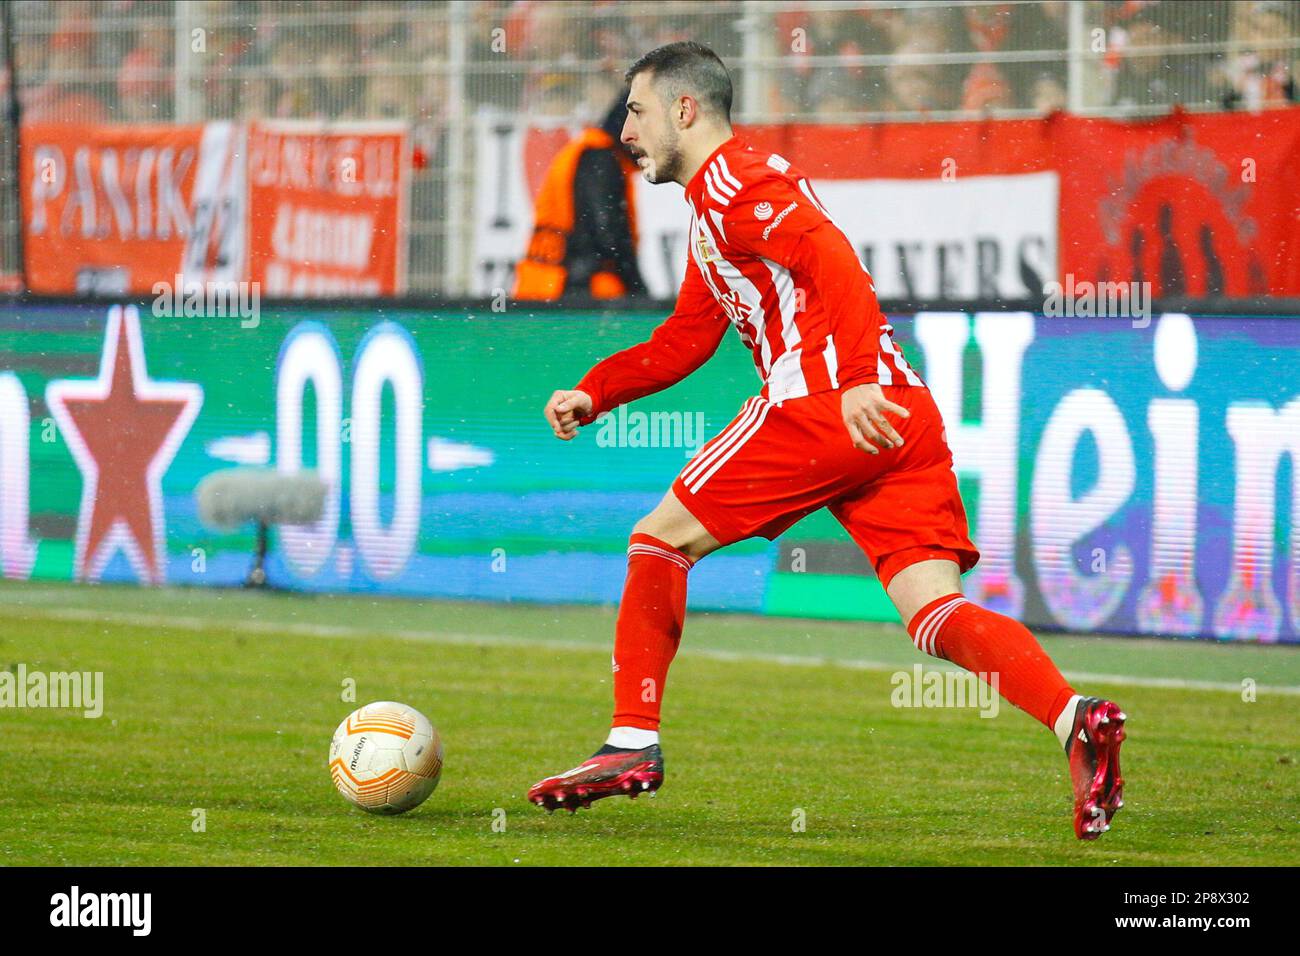 Berlin, Germany, 9 March, 2023. Josip Juranovic from 1. FC Union Berlin in action during the match between 1. FC Union Berlin Vs. Union Saint-Gilloise, round of sixteen, UEFA Europa League 2022/23, Stadion An der Alten Försterei, Berlin, Germany, 9 March, 2023. Iñaki Esnaola Stock Photo